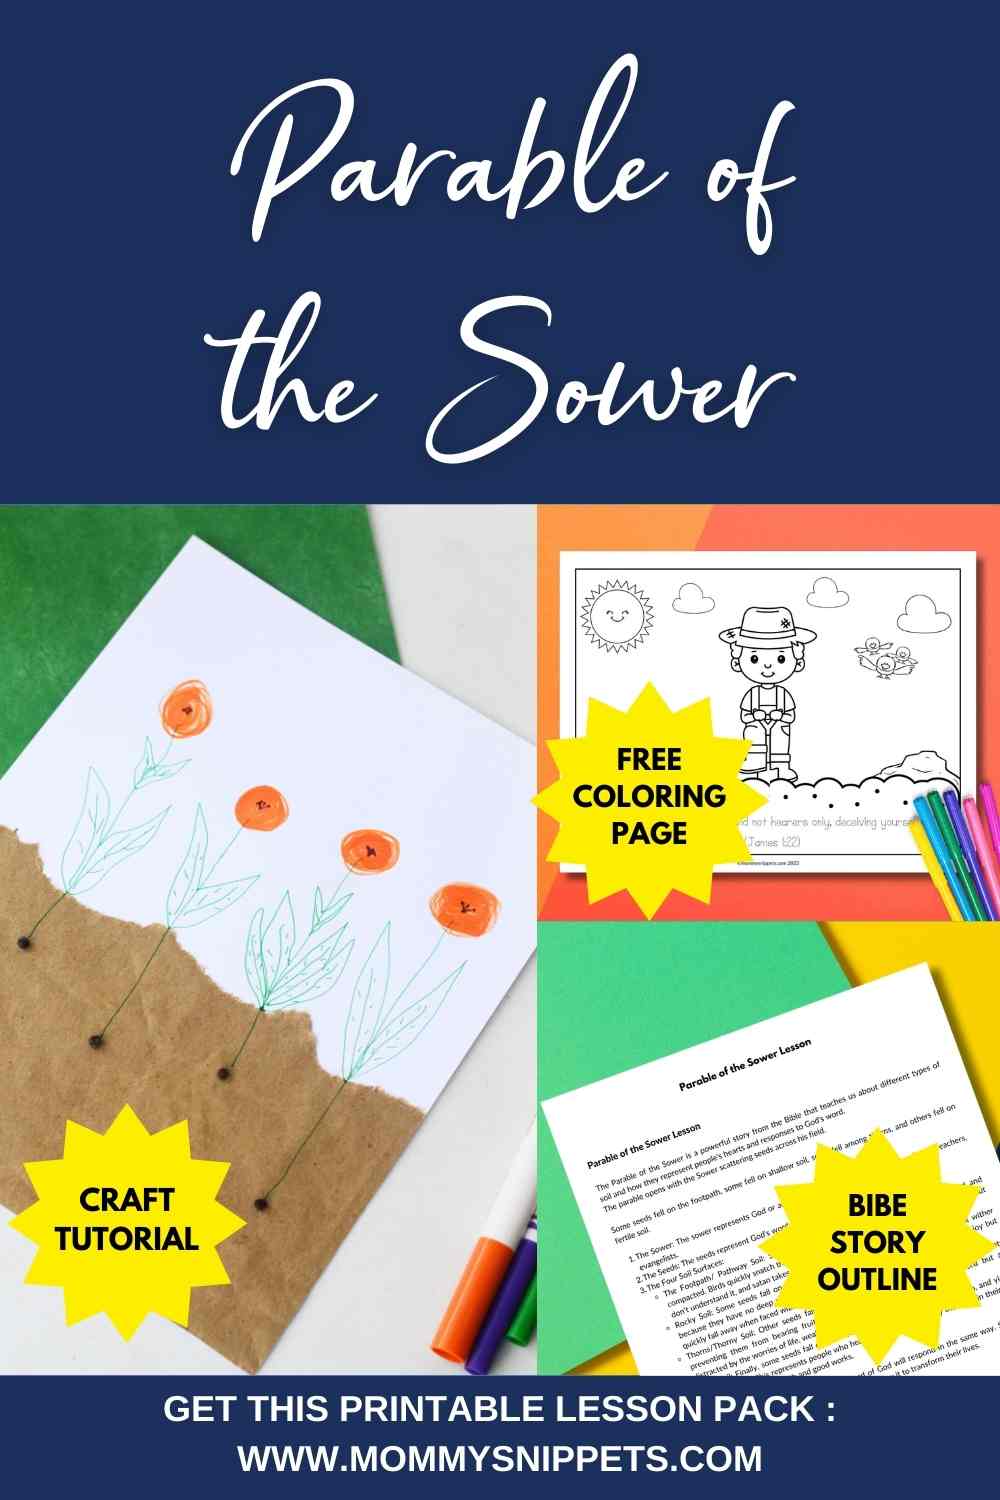 Use this easy Parable of the Sower craft and free Parable of the Sower coloring page to help kids remember the Parable of the Sower lesson taught by Jesus. 